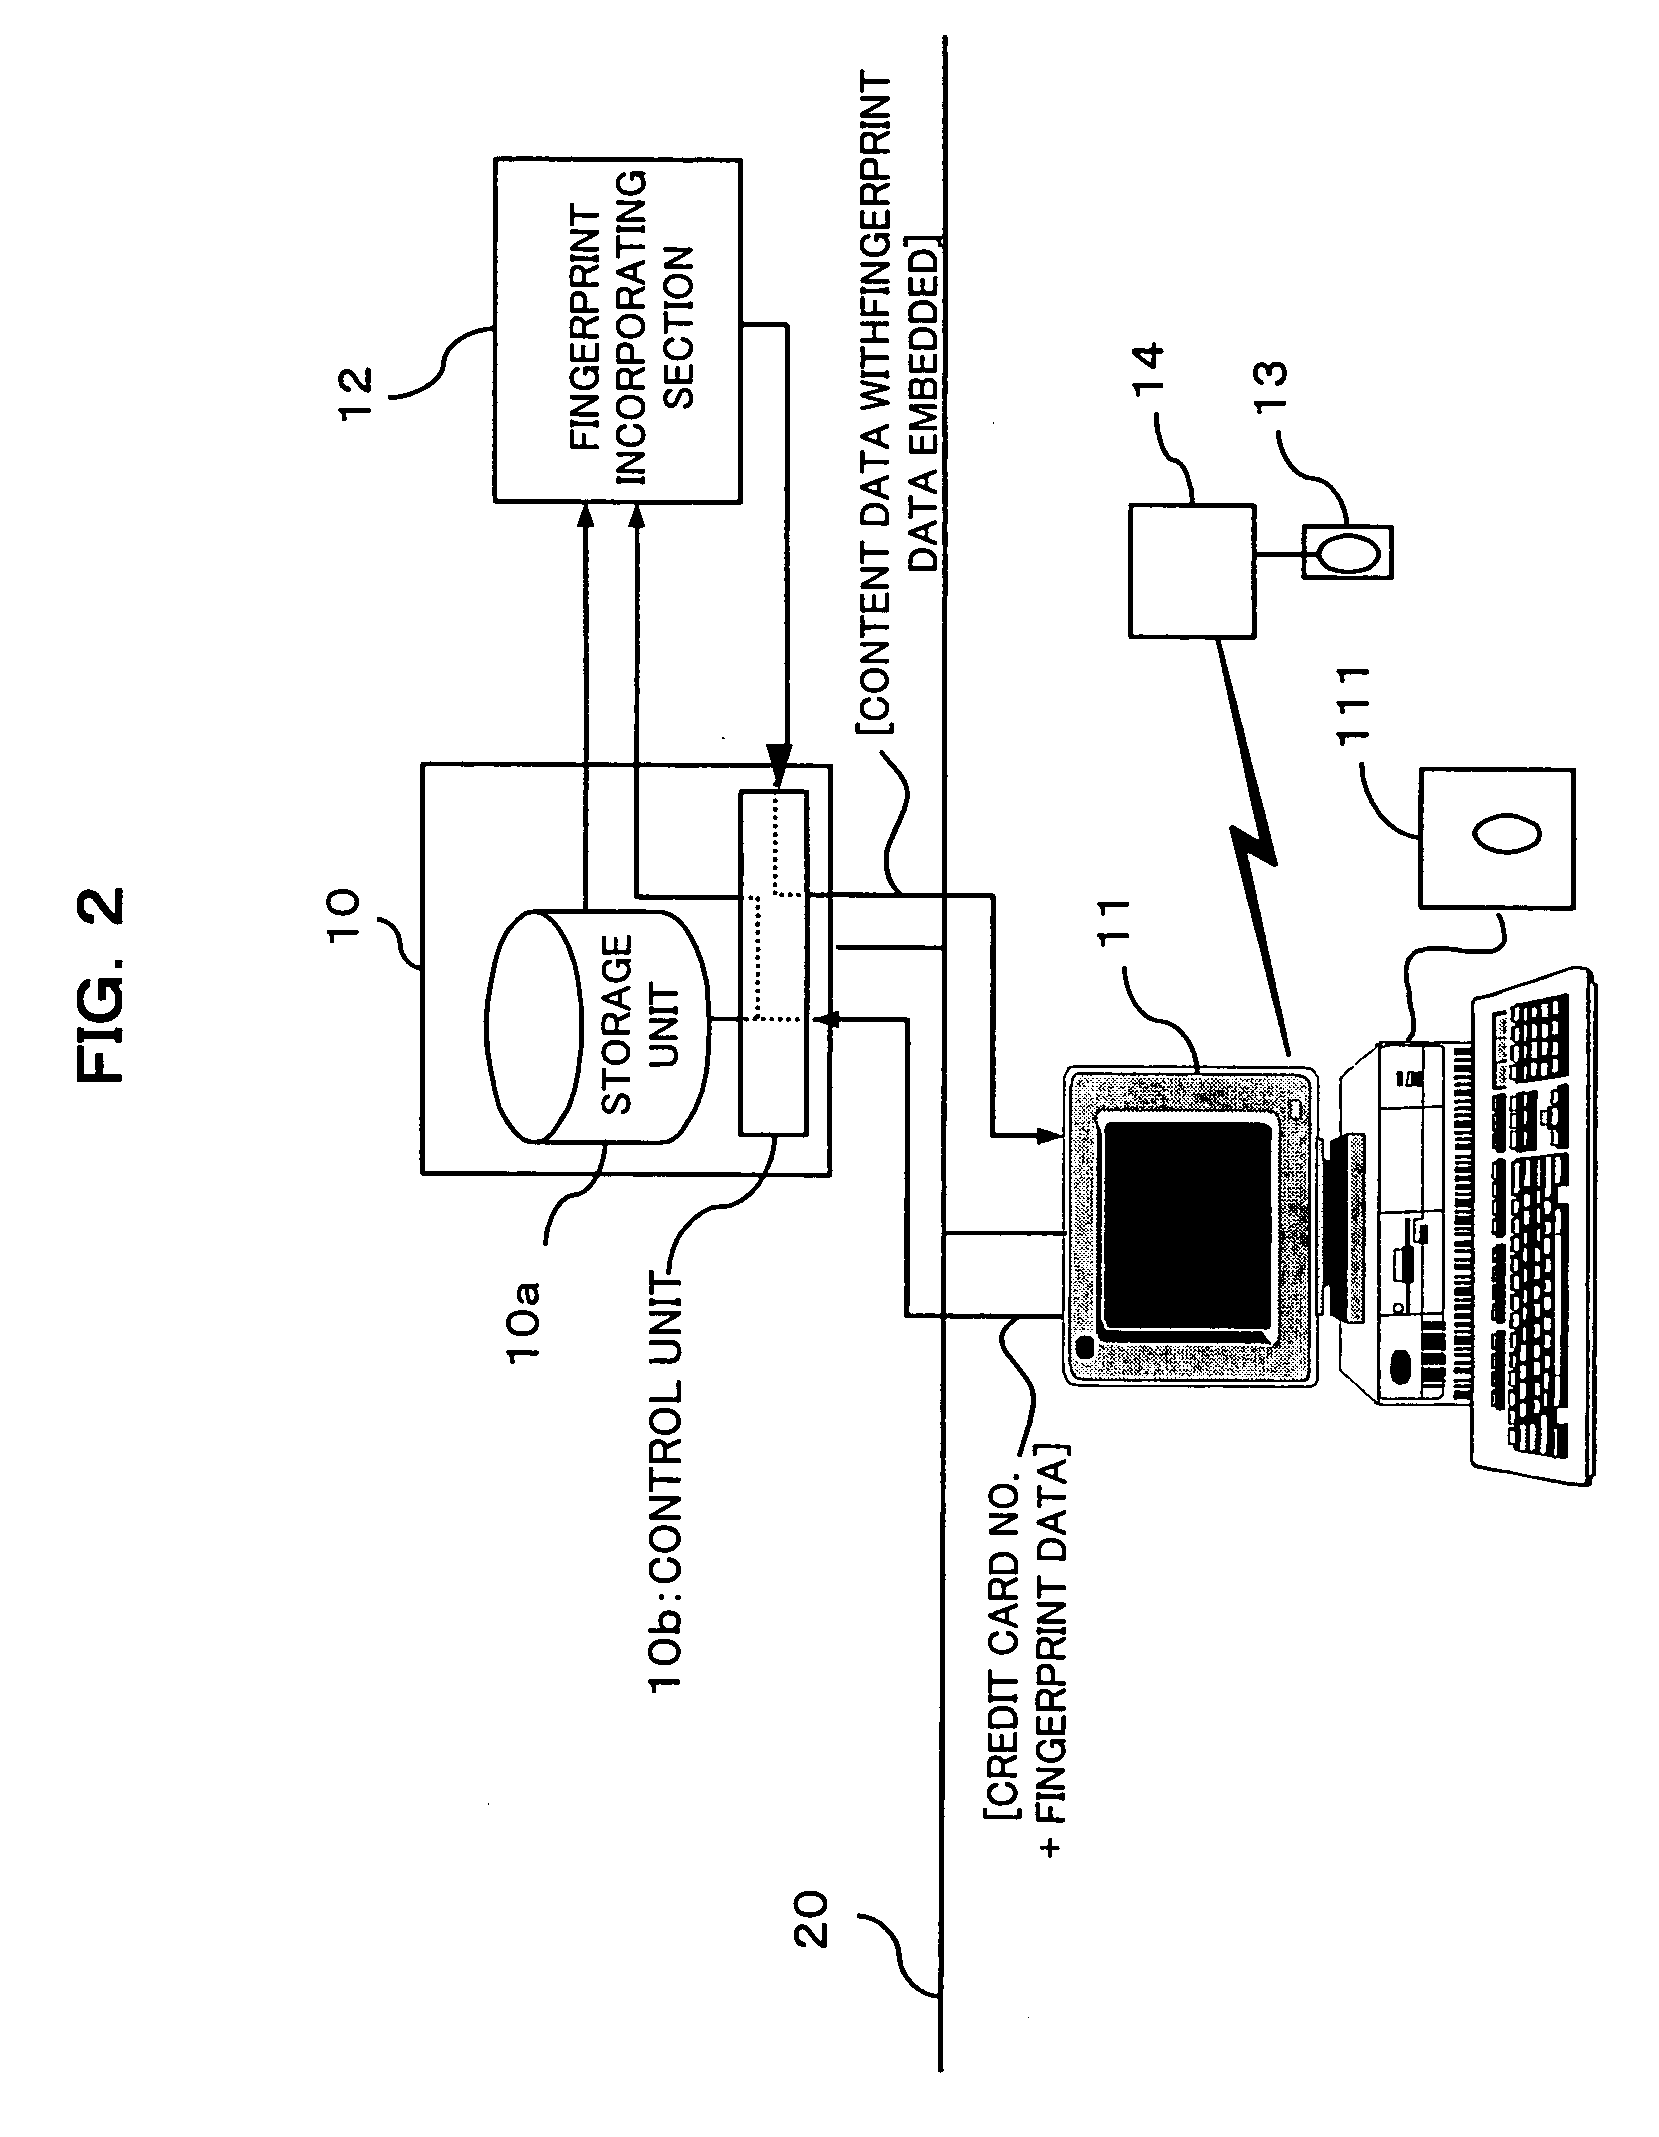 Content providing system and content reproducing apparatus